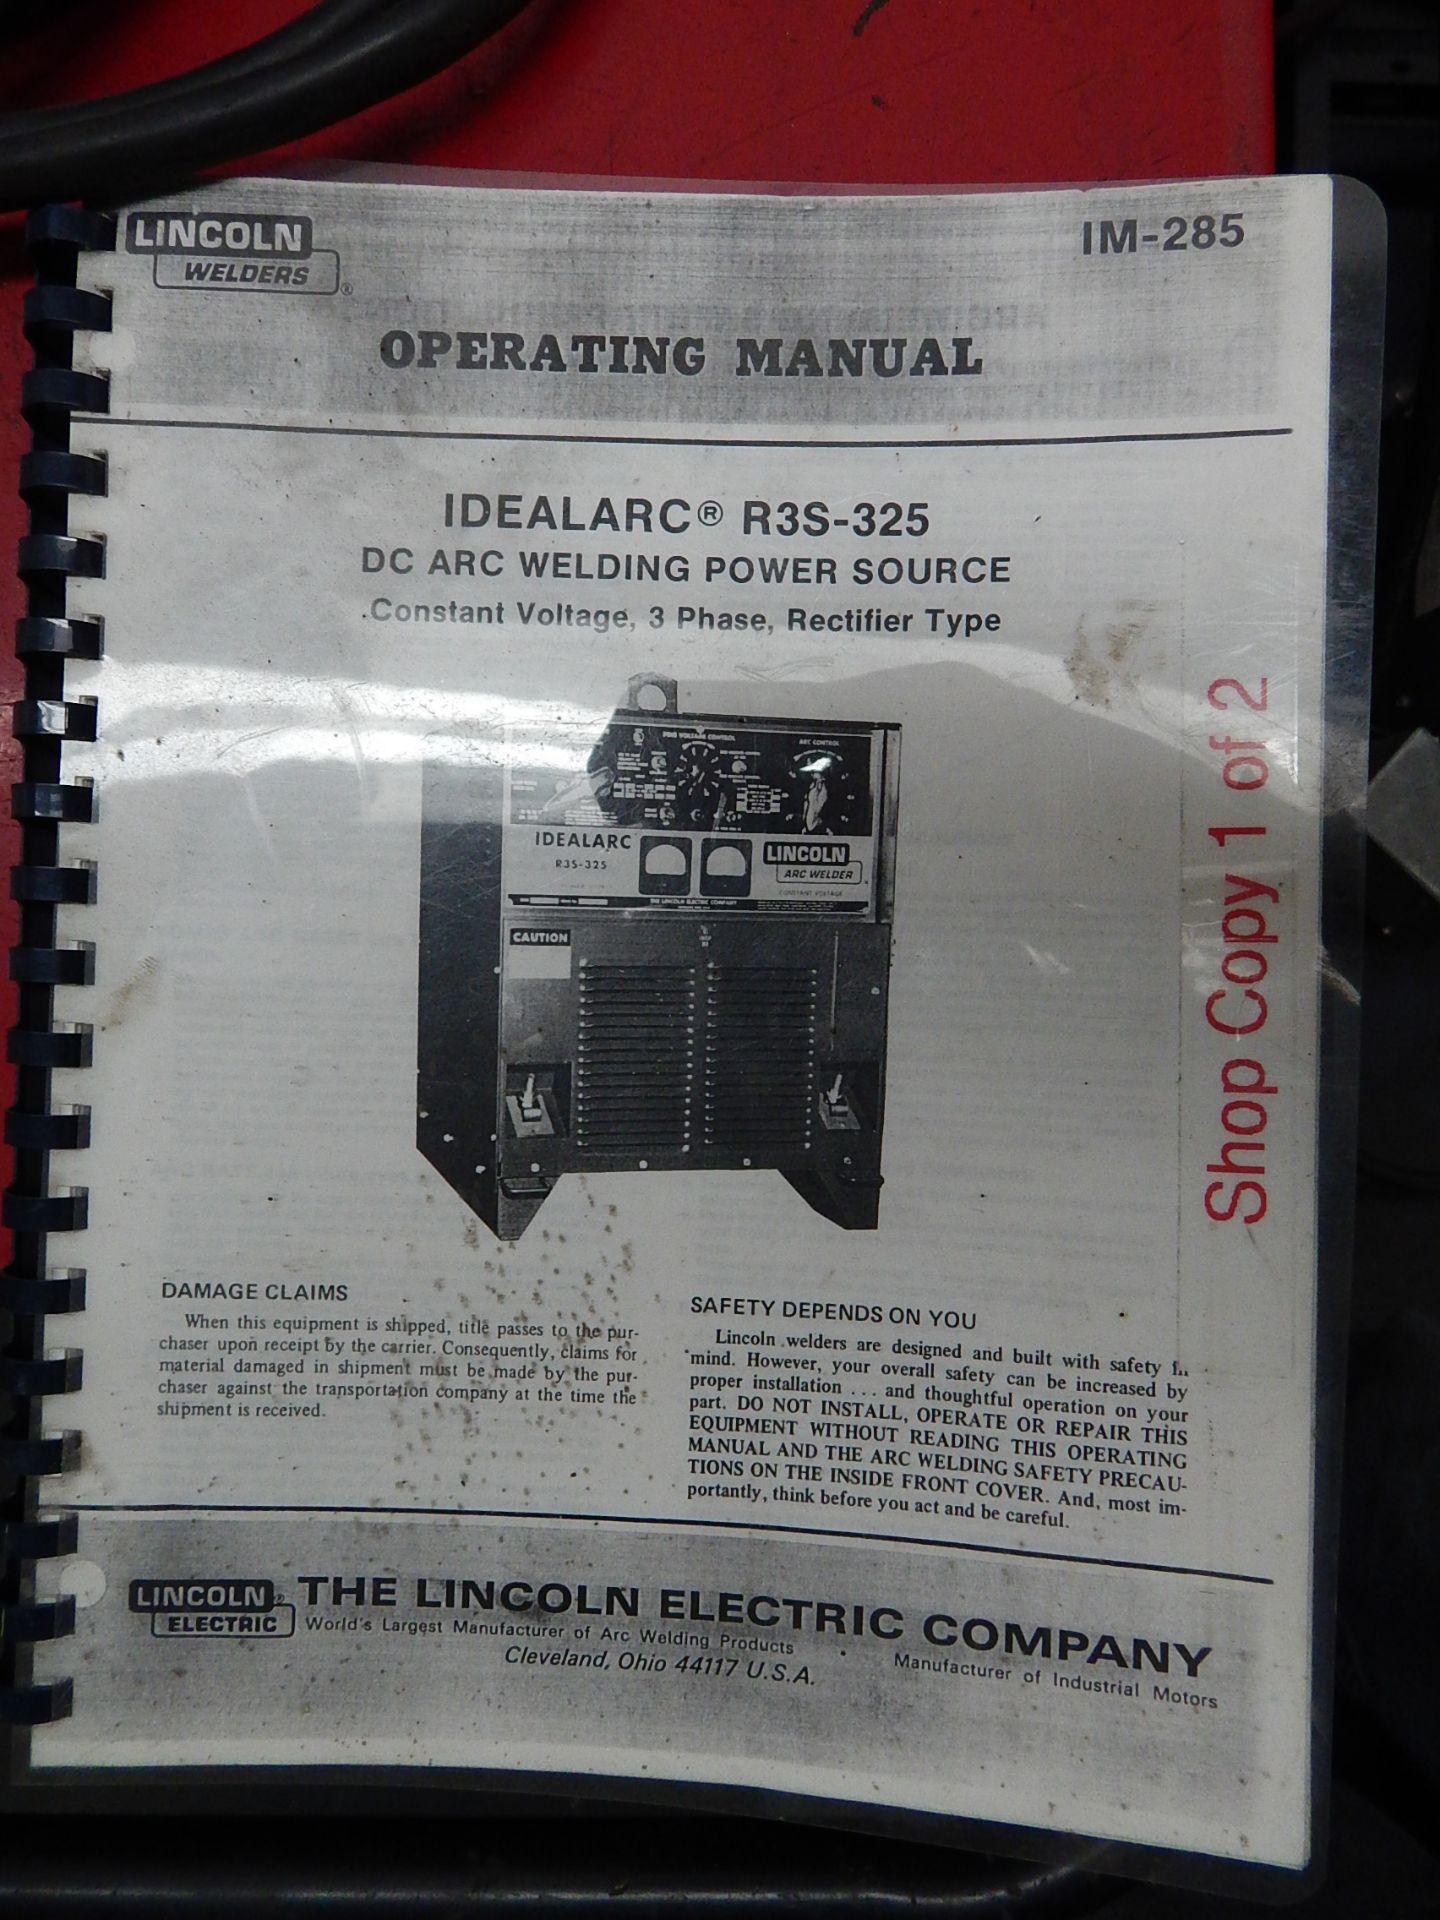 Lincoln Idealarc R3S-325 Mig Welder, s/n AC679812, with Lincoln LN-7 Wire Feeder and Mig Gun - Image 5 of 5